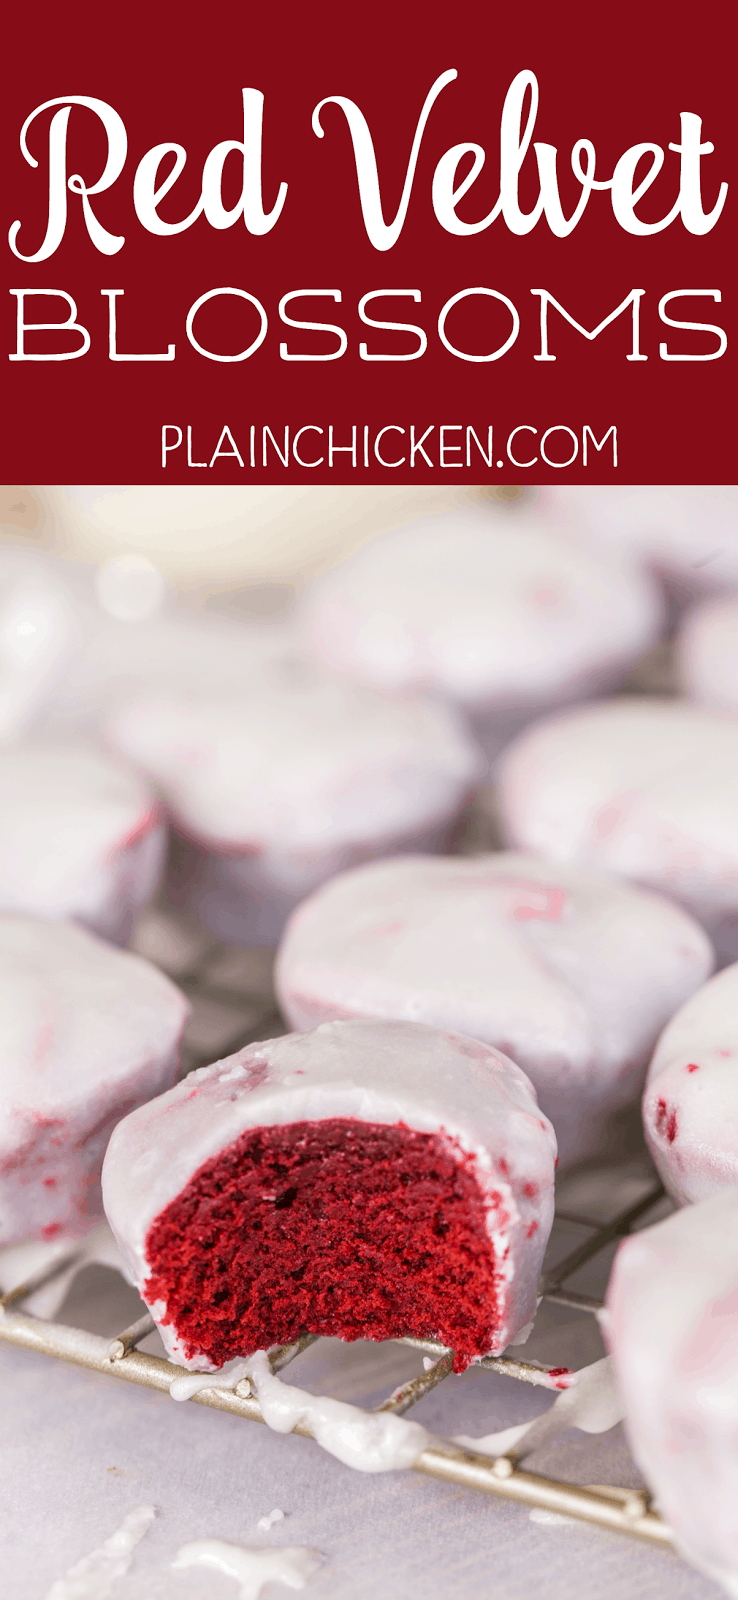 Red Velvet Blossoms - mini red velvet cakes dunked in a homemade cream cheese glaze. These things are CRAZY good! I ate WAY too many of these cakes. Red Velvet cake mix, chocolate pudding, oil, eggs, cream cheese, milk, powdered sugar. Make 5 dozen - great for holiday parties!